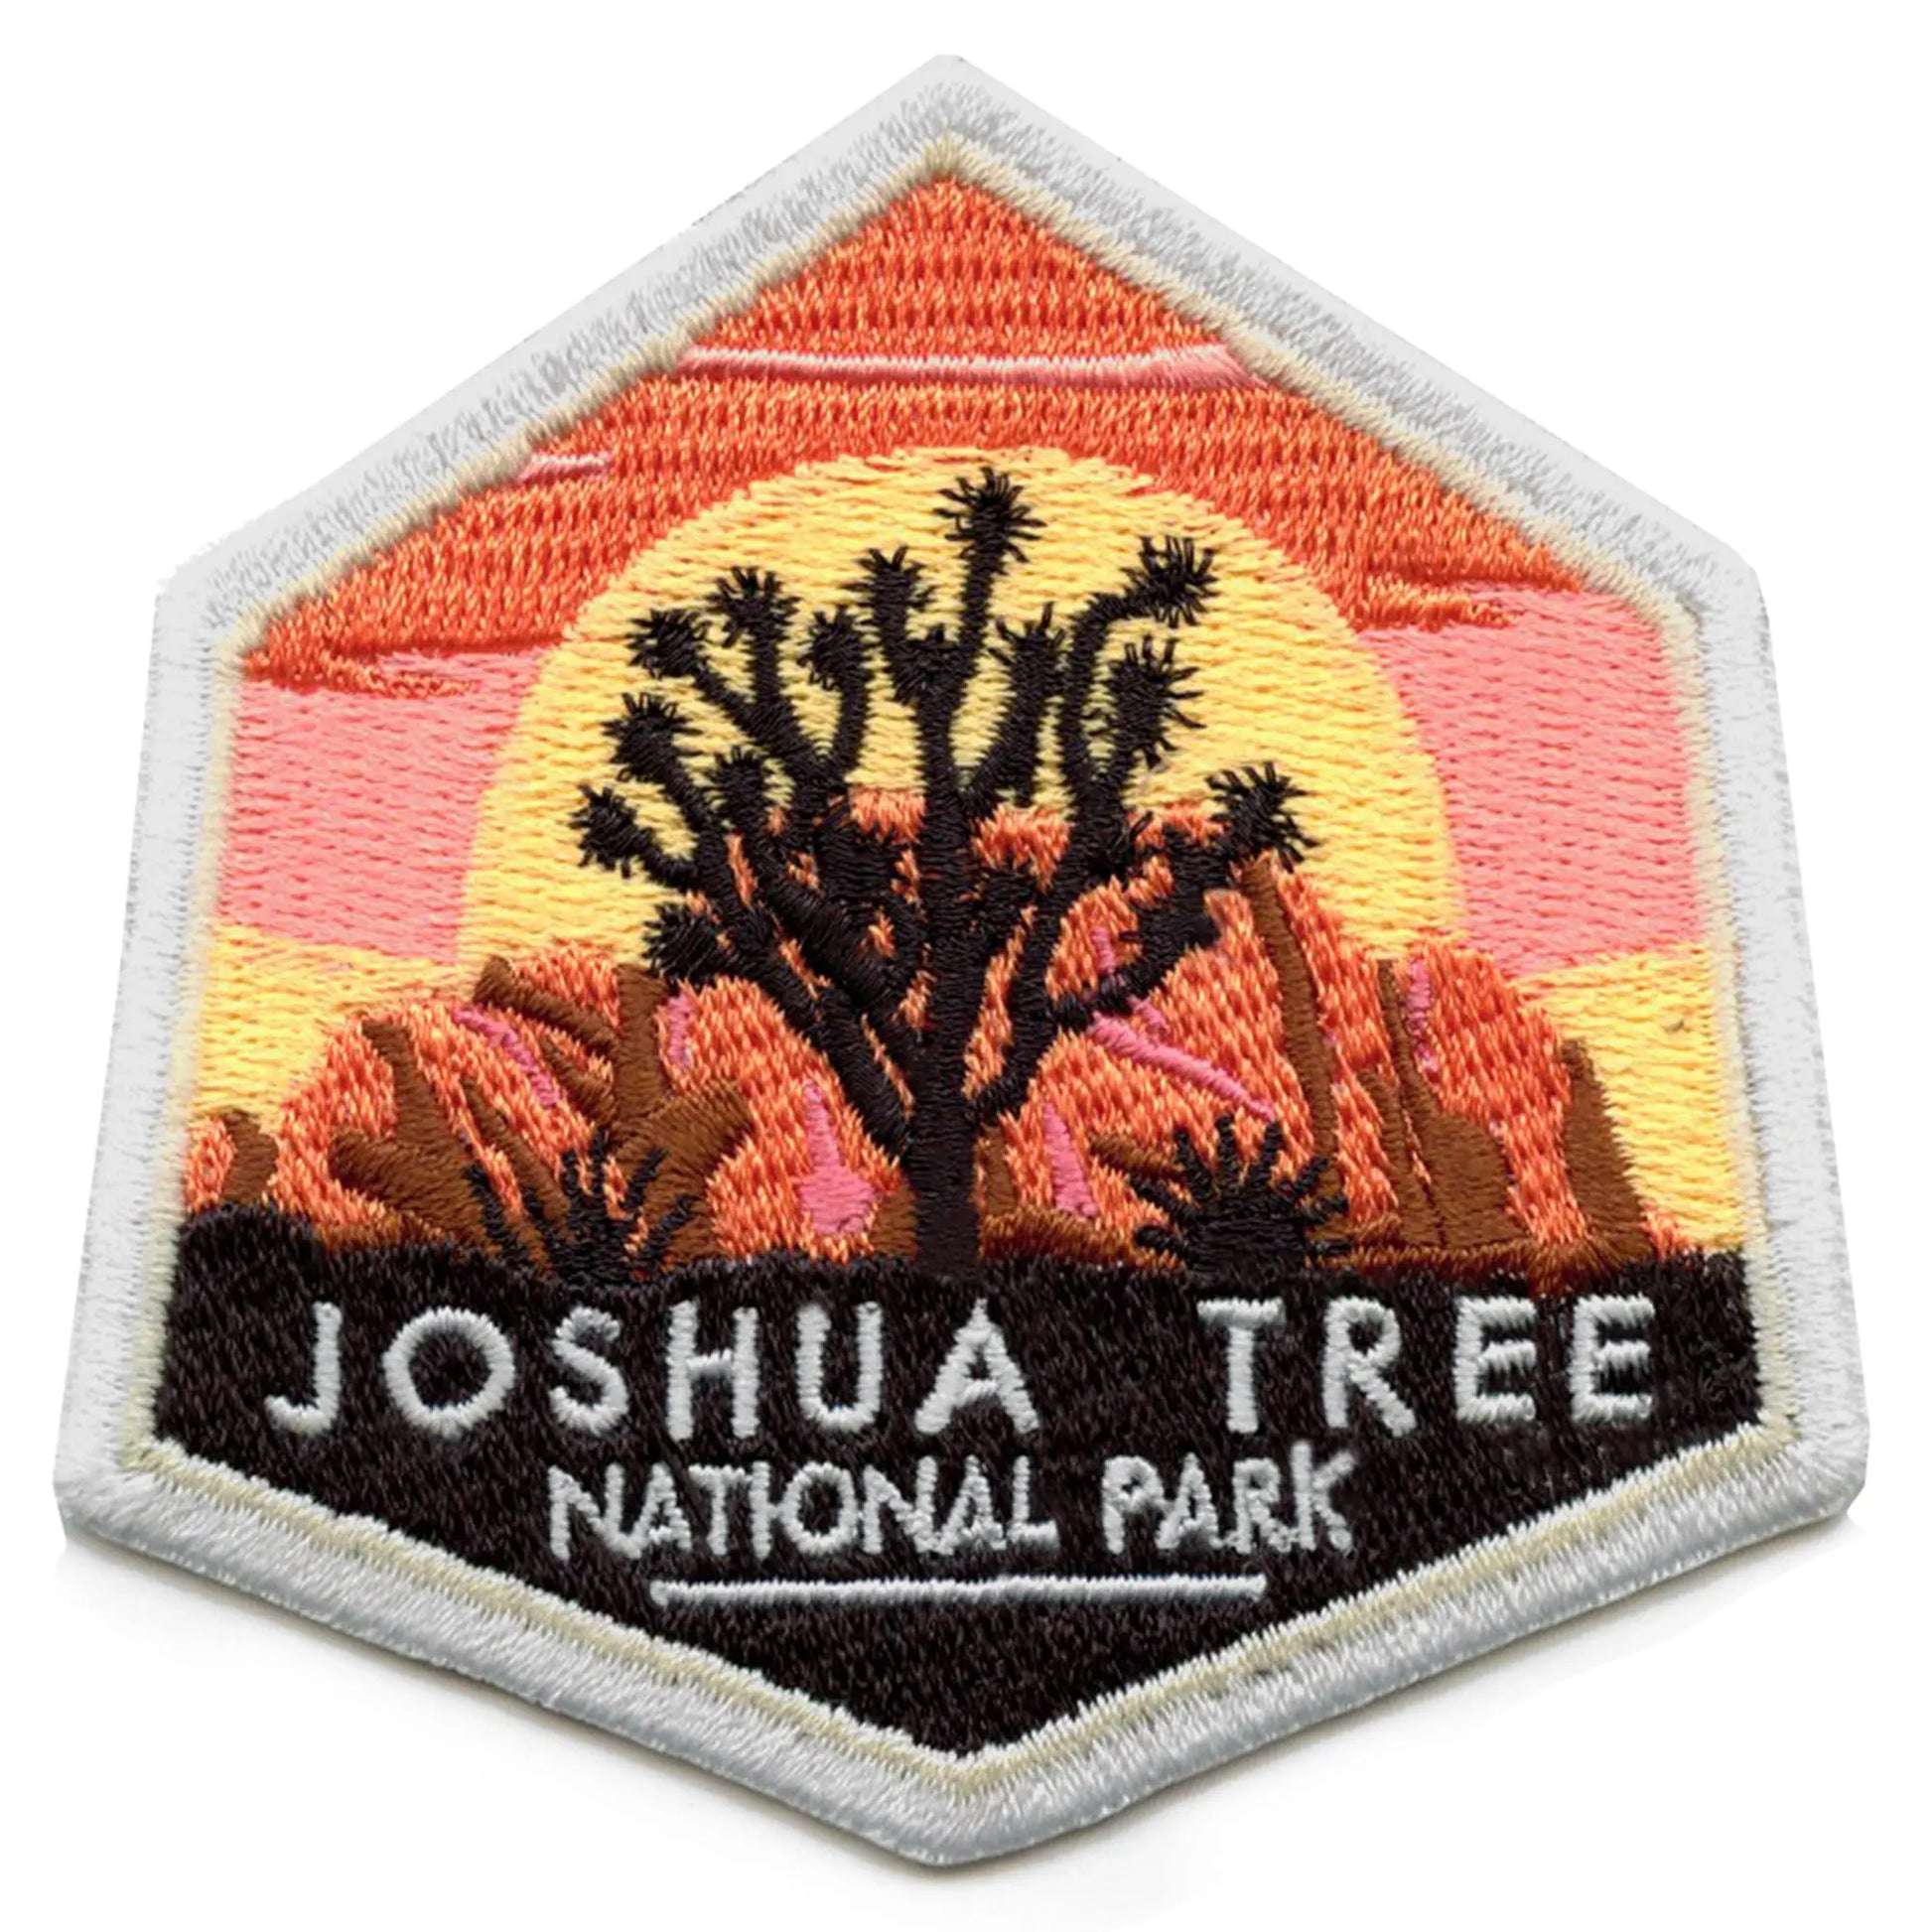 Joshua Tree Sunset Patch National Park Travel Embroidered Iron On